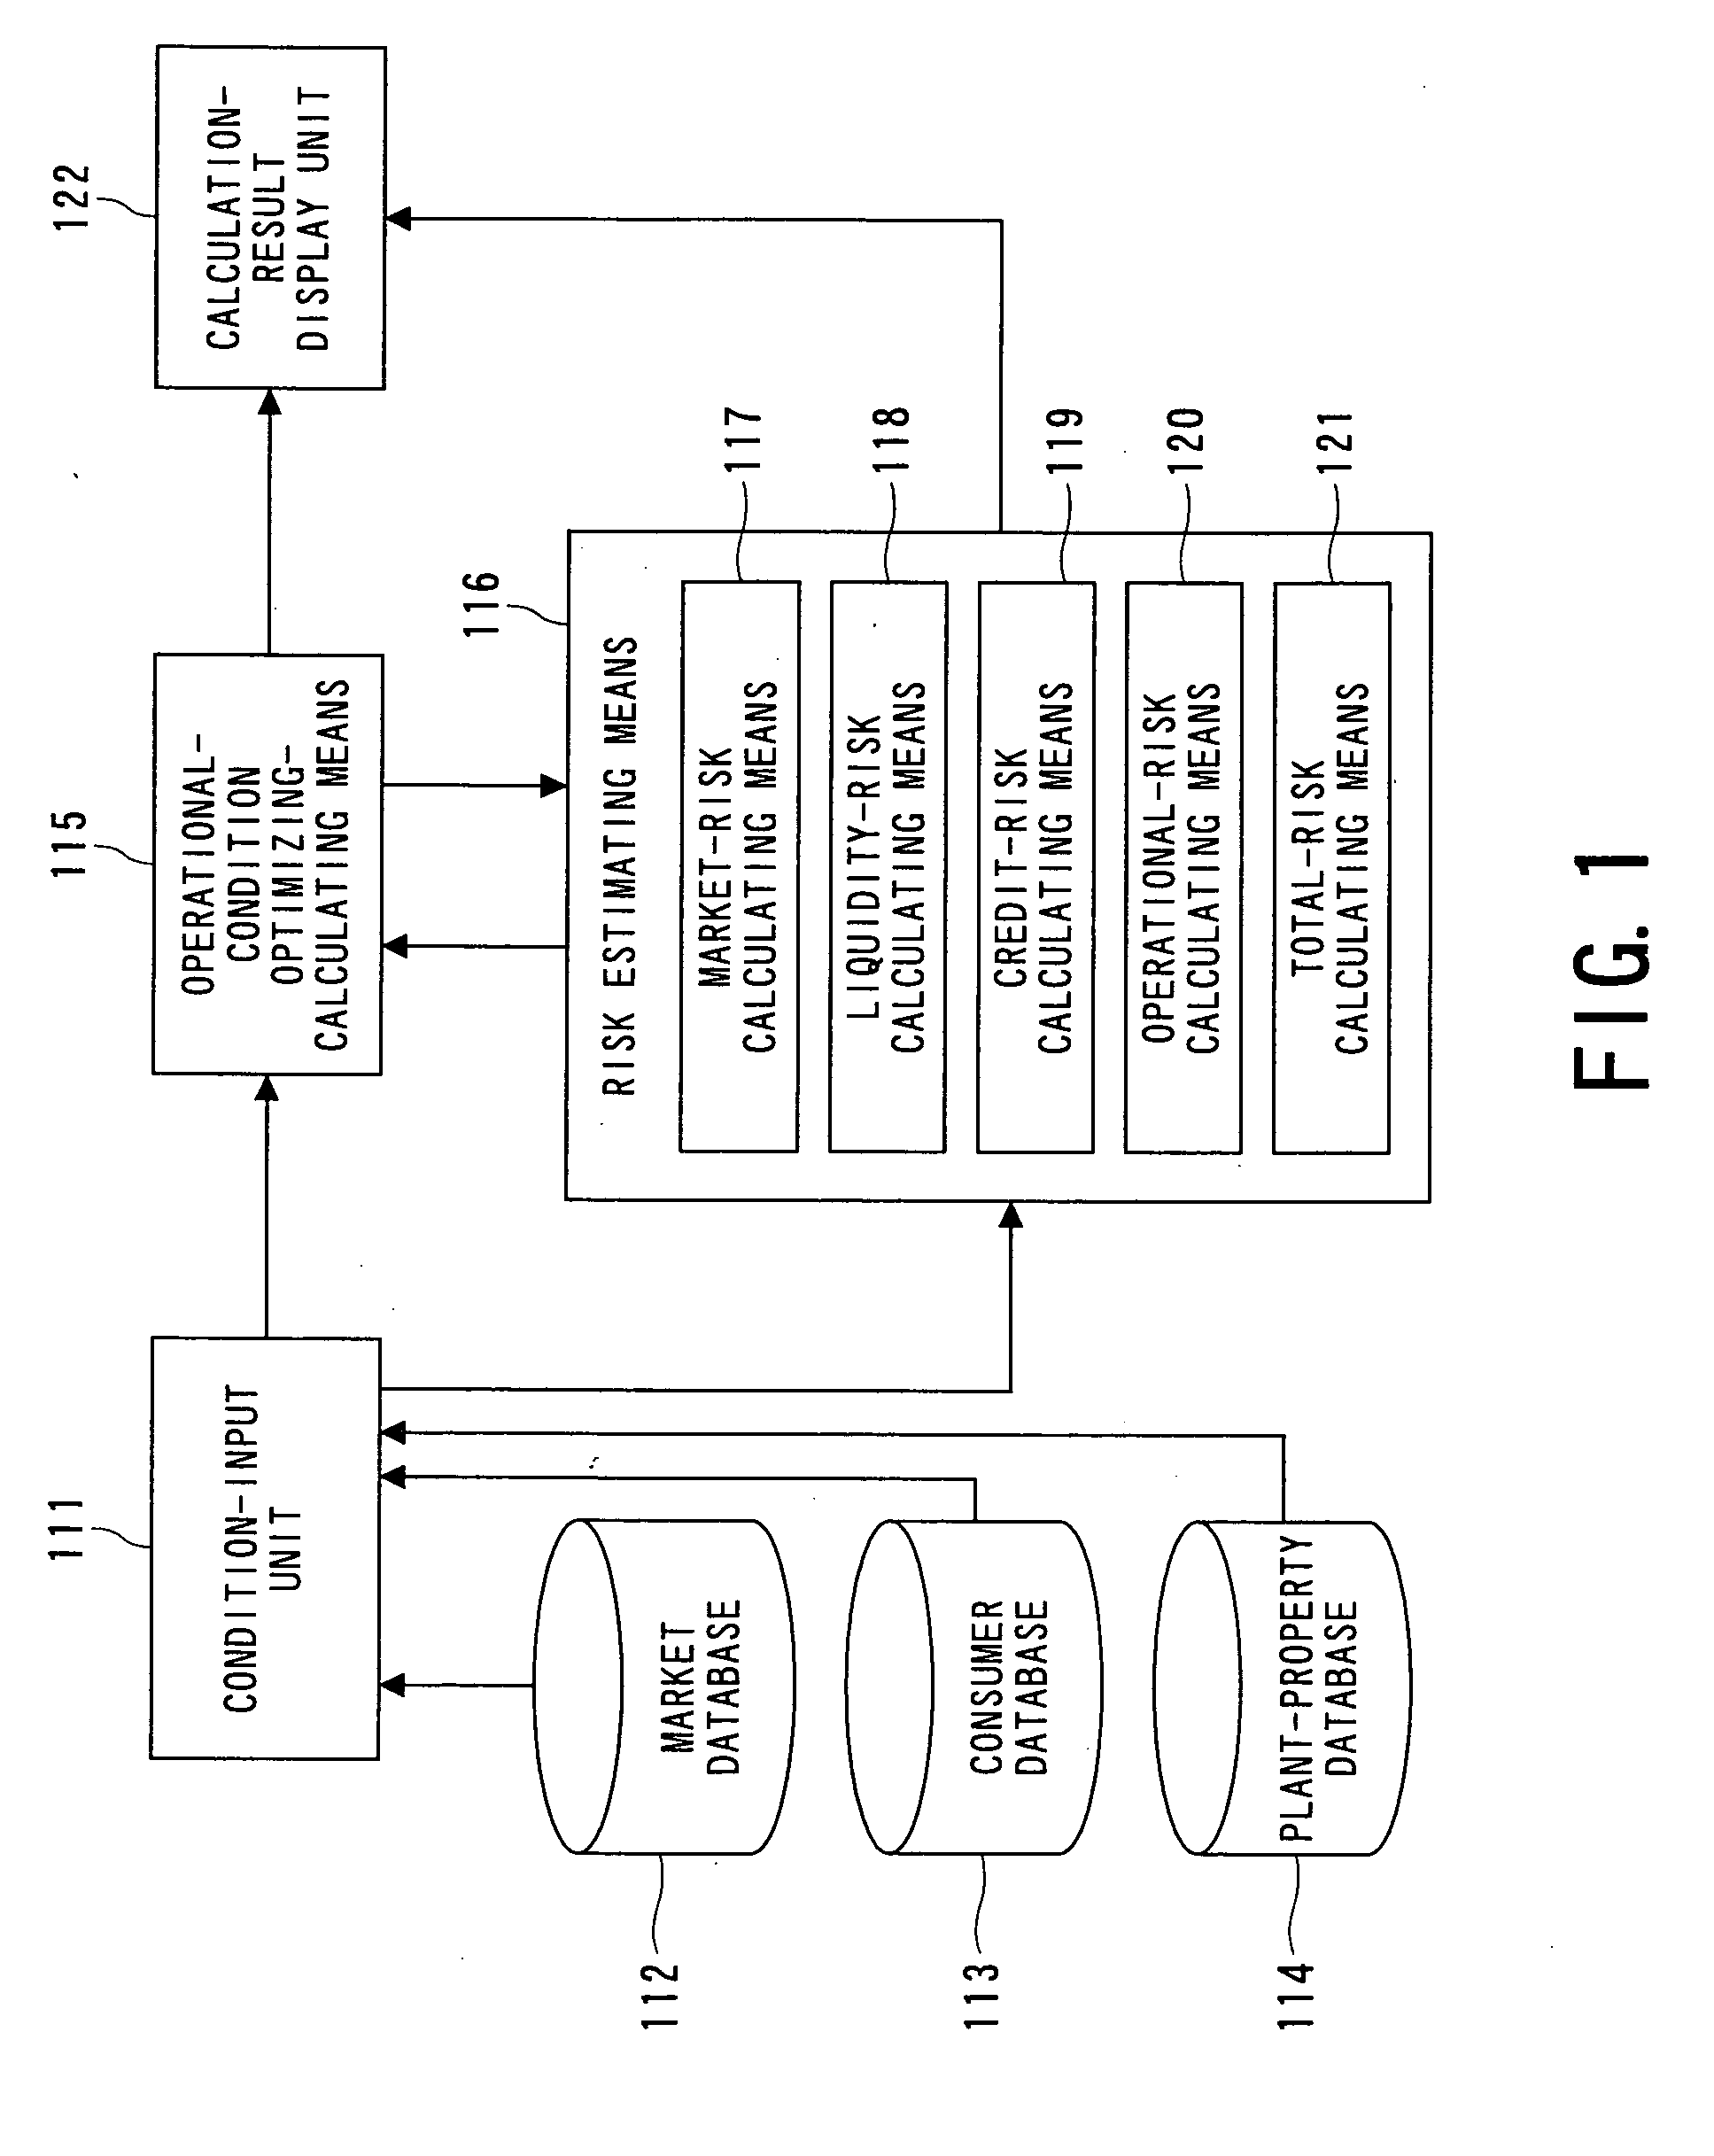 Electric-power-generating-facility operation management support system, electric-power-generating-facility operation management support method, and program for executing support method, and program for executing operation management support method on computer